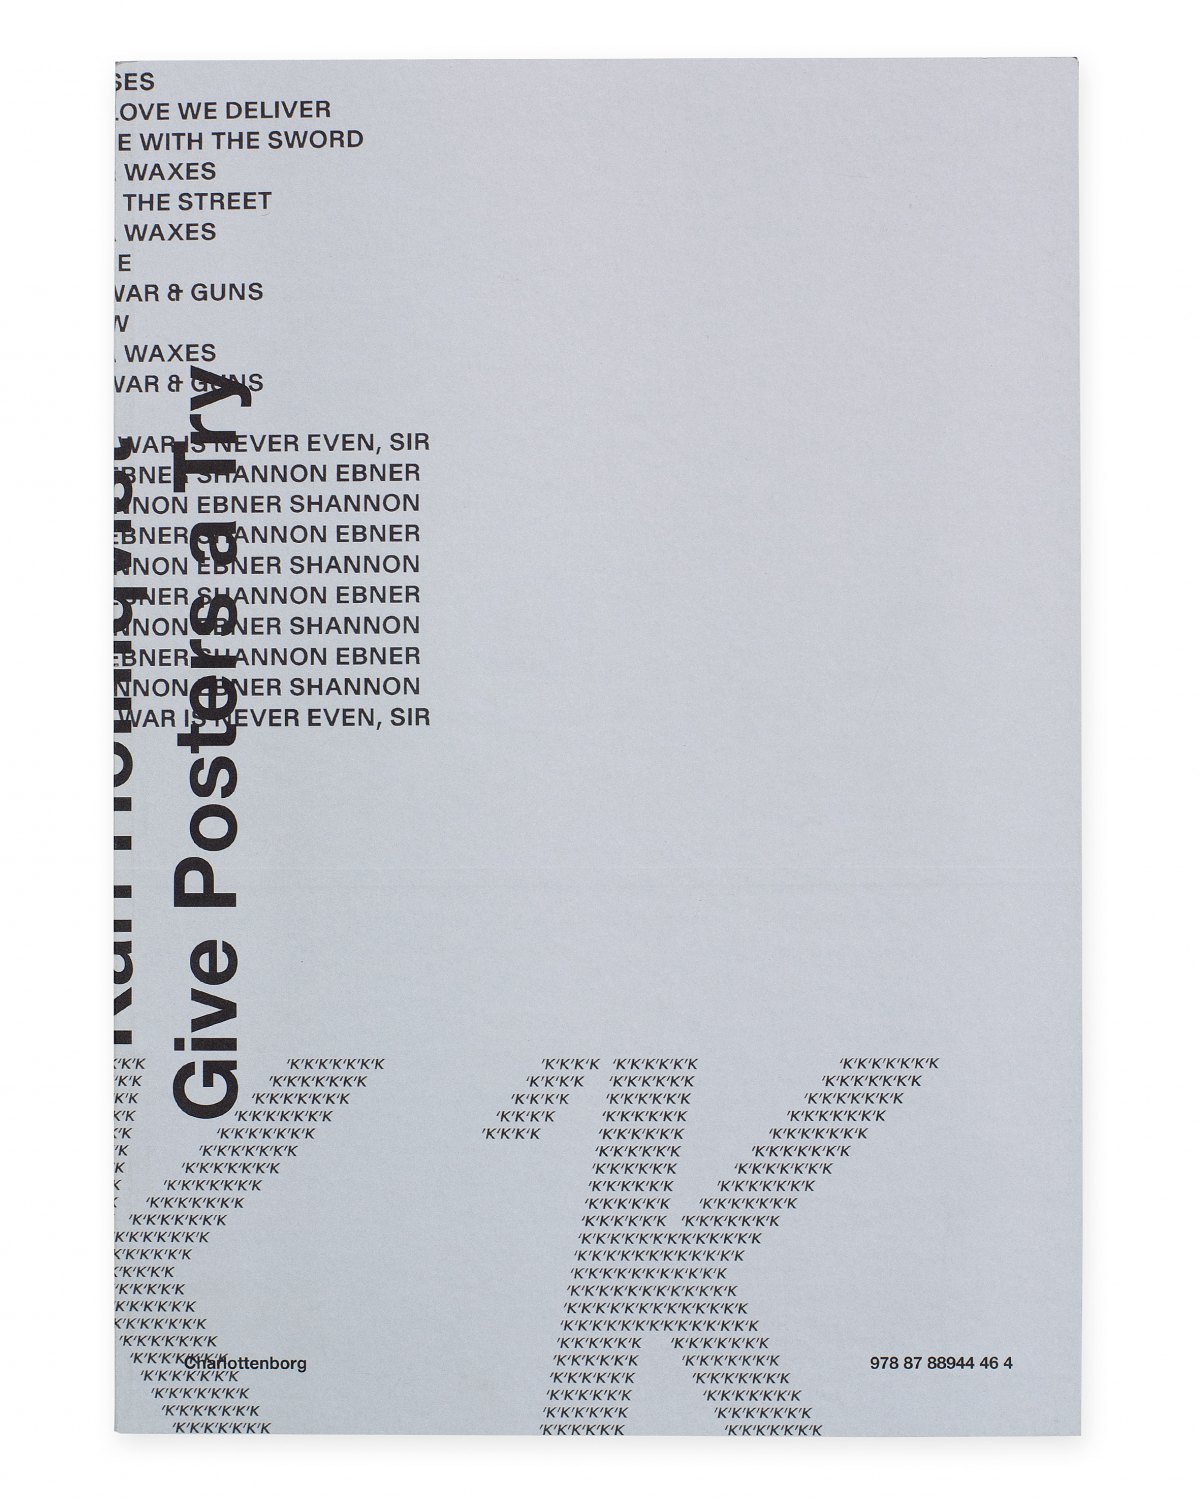 Karl Holmqvist, Give Posters A Try  ed. by Kunsthall Charlottenborg, Catalogue, Charlottenborg 2014, 71 p. ISBN 978-8-78894-446-4